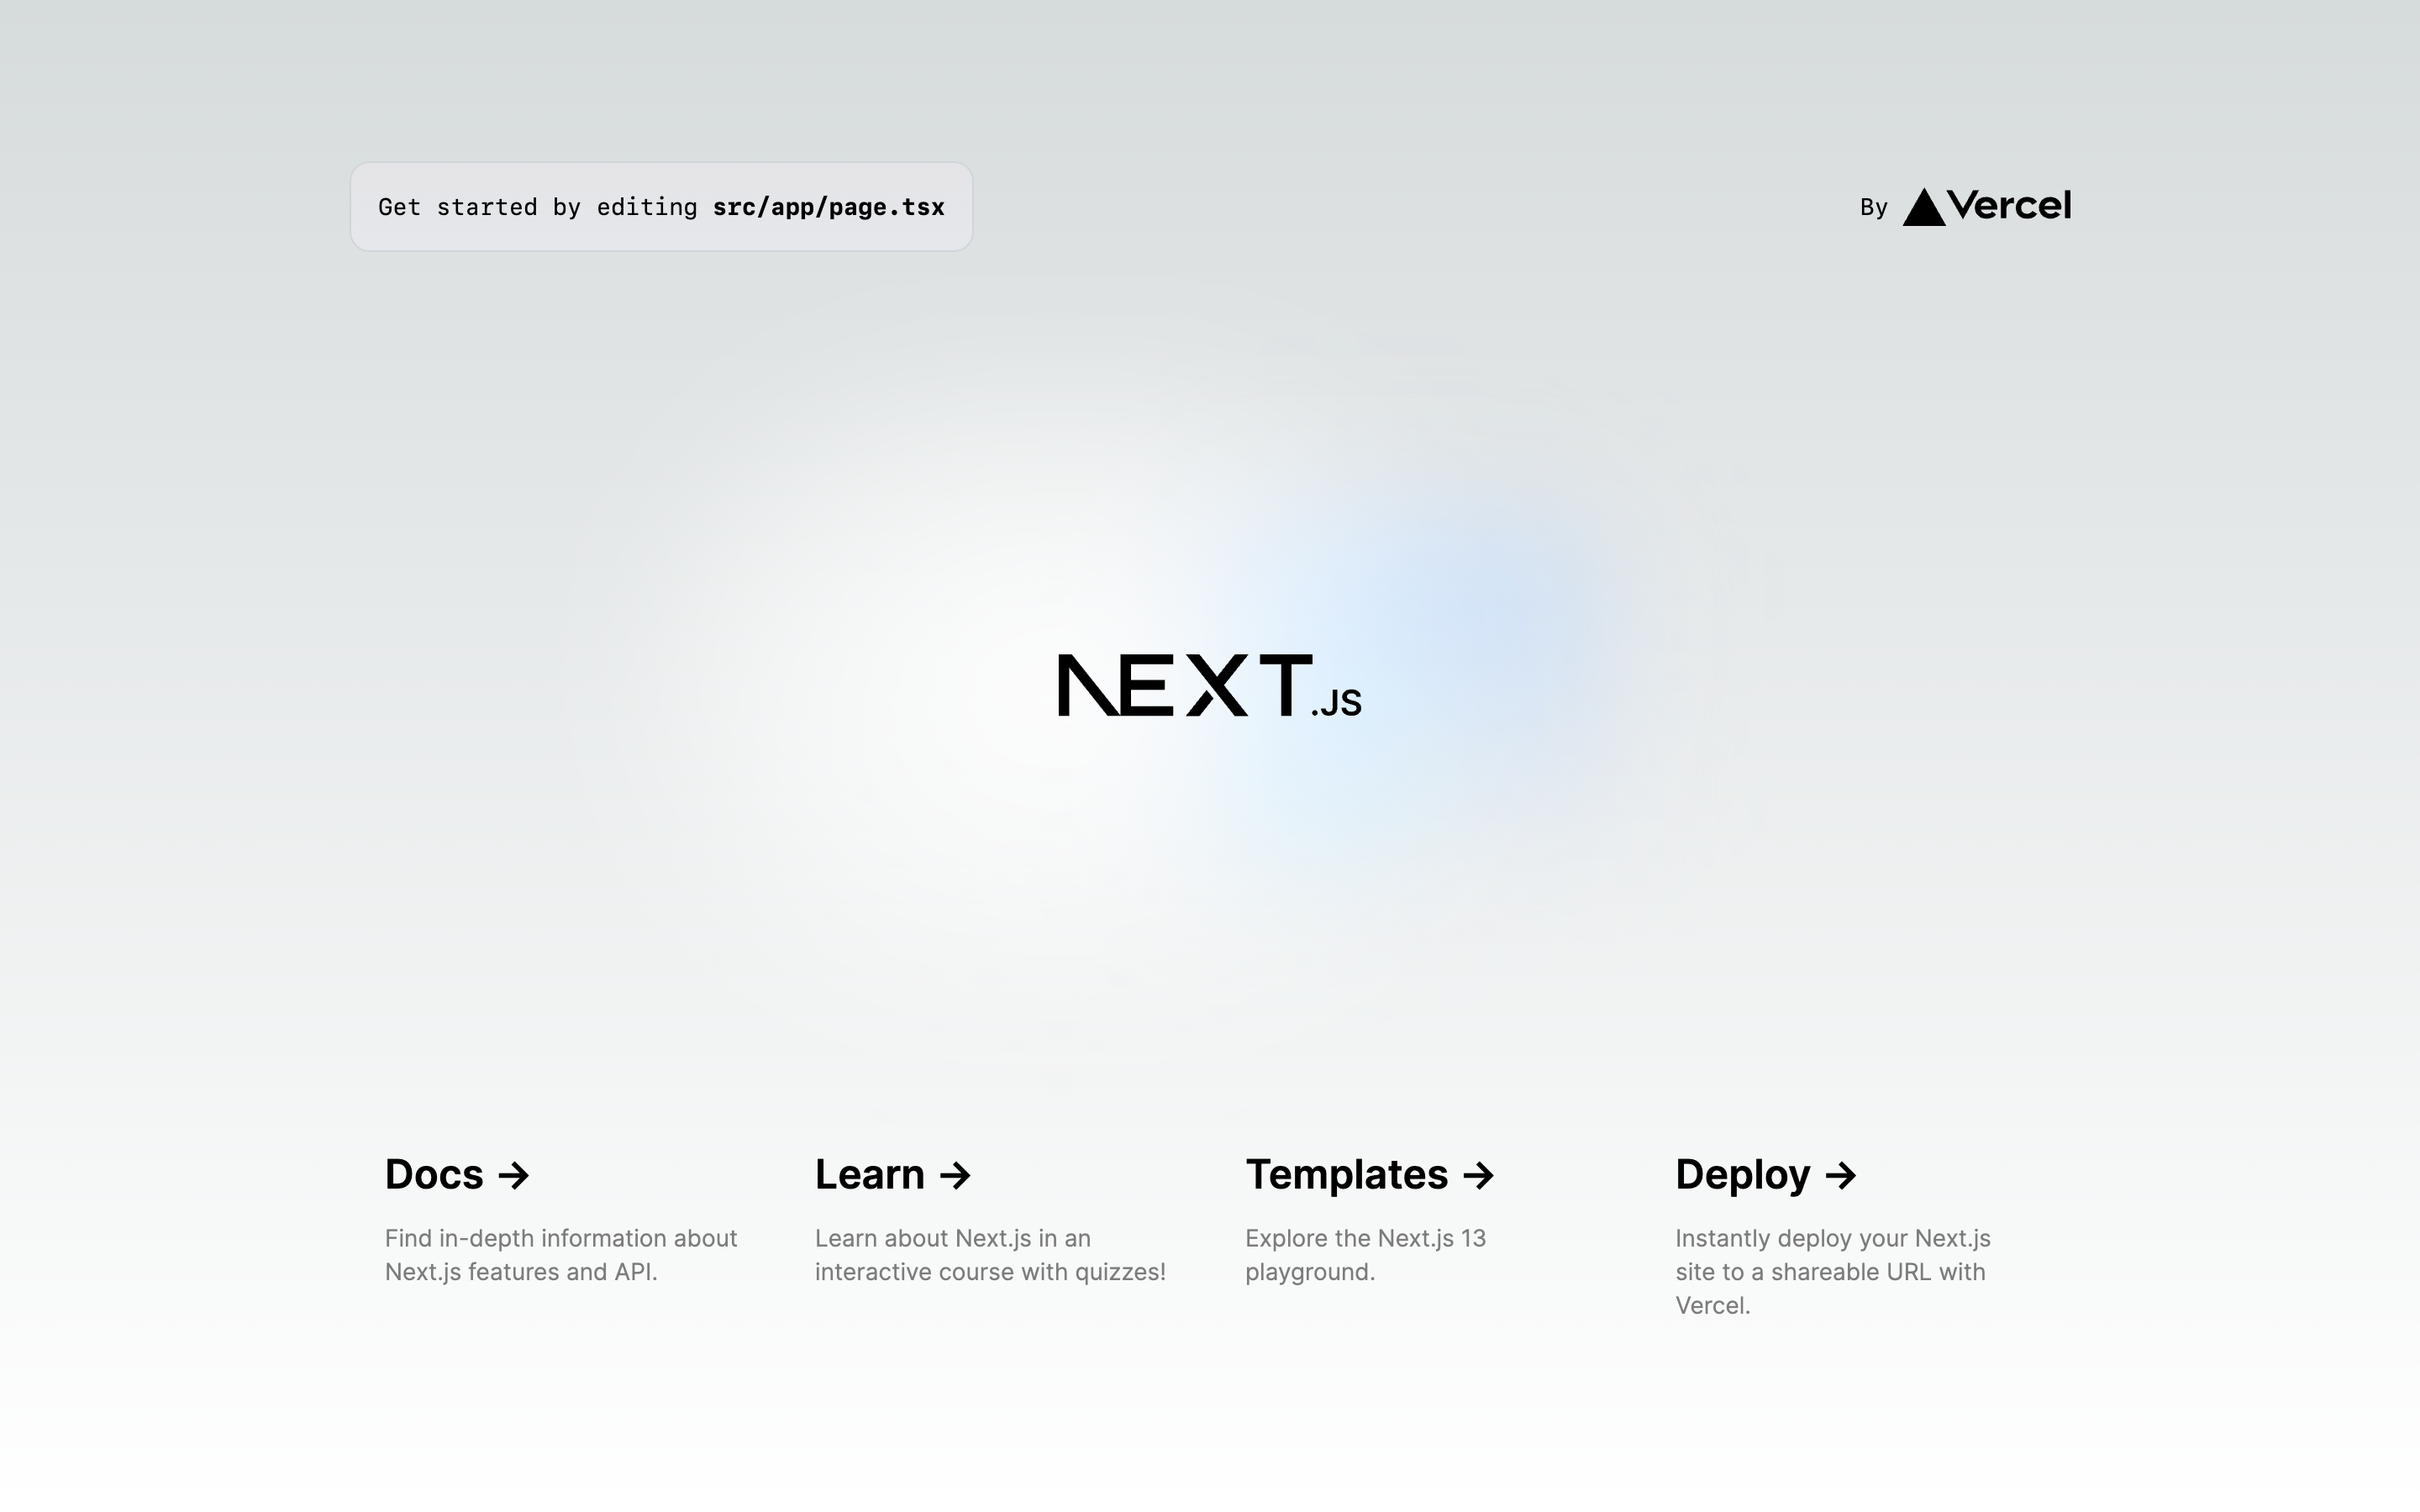 Our project with Next.js and Tailwind is ready. Let’s now do some preparation work for the content part.
